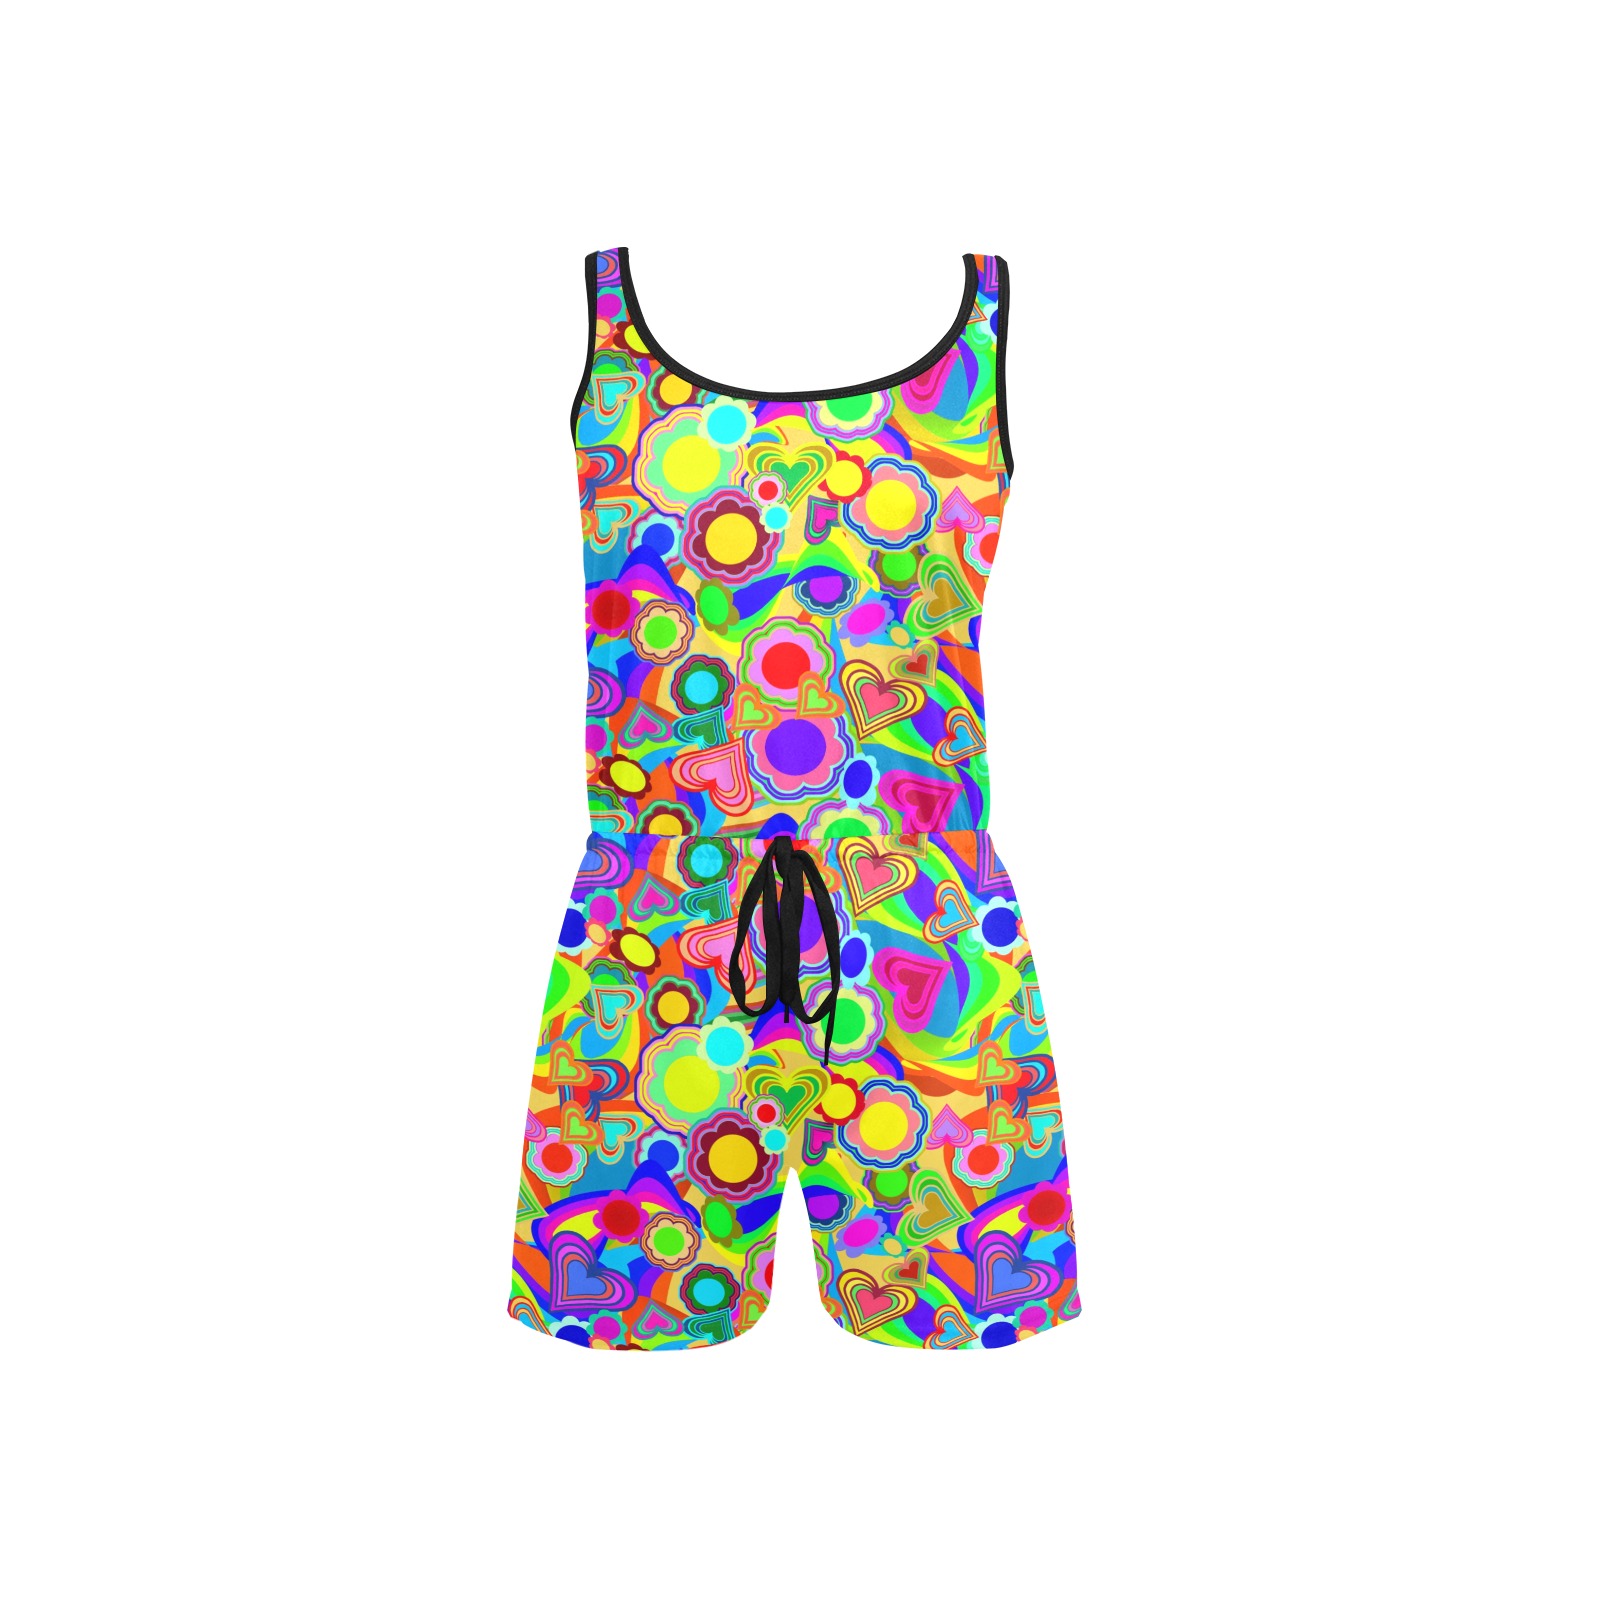 Groovy Hearts and Flowers All Over Print Short Jumpsuit